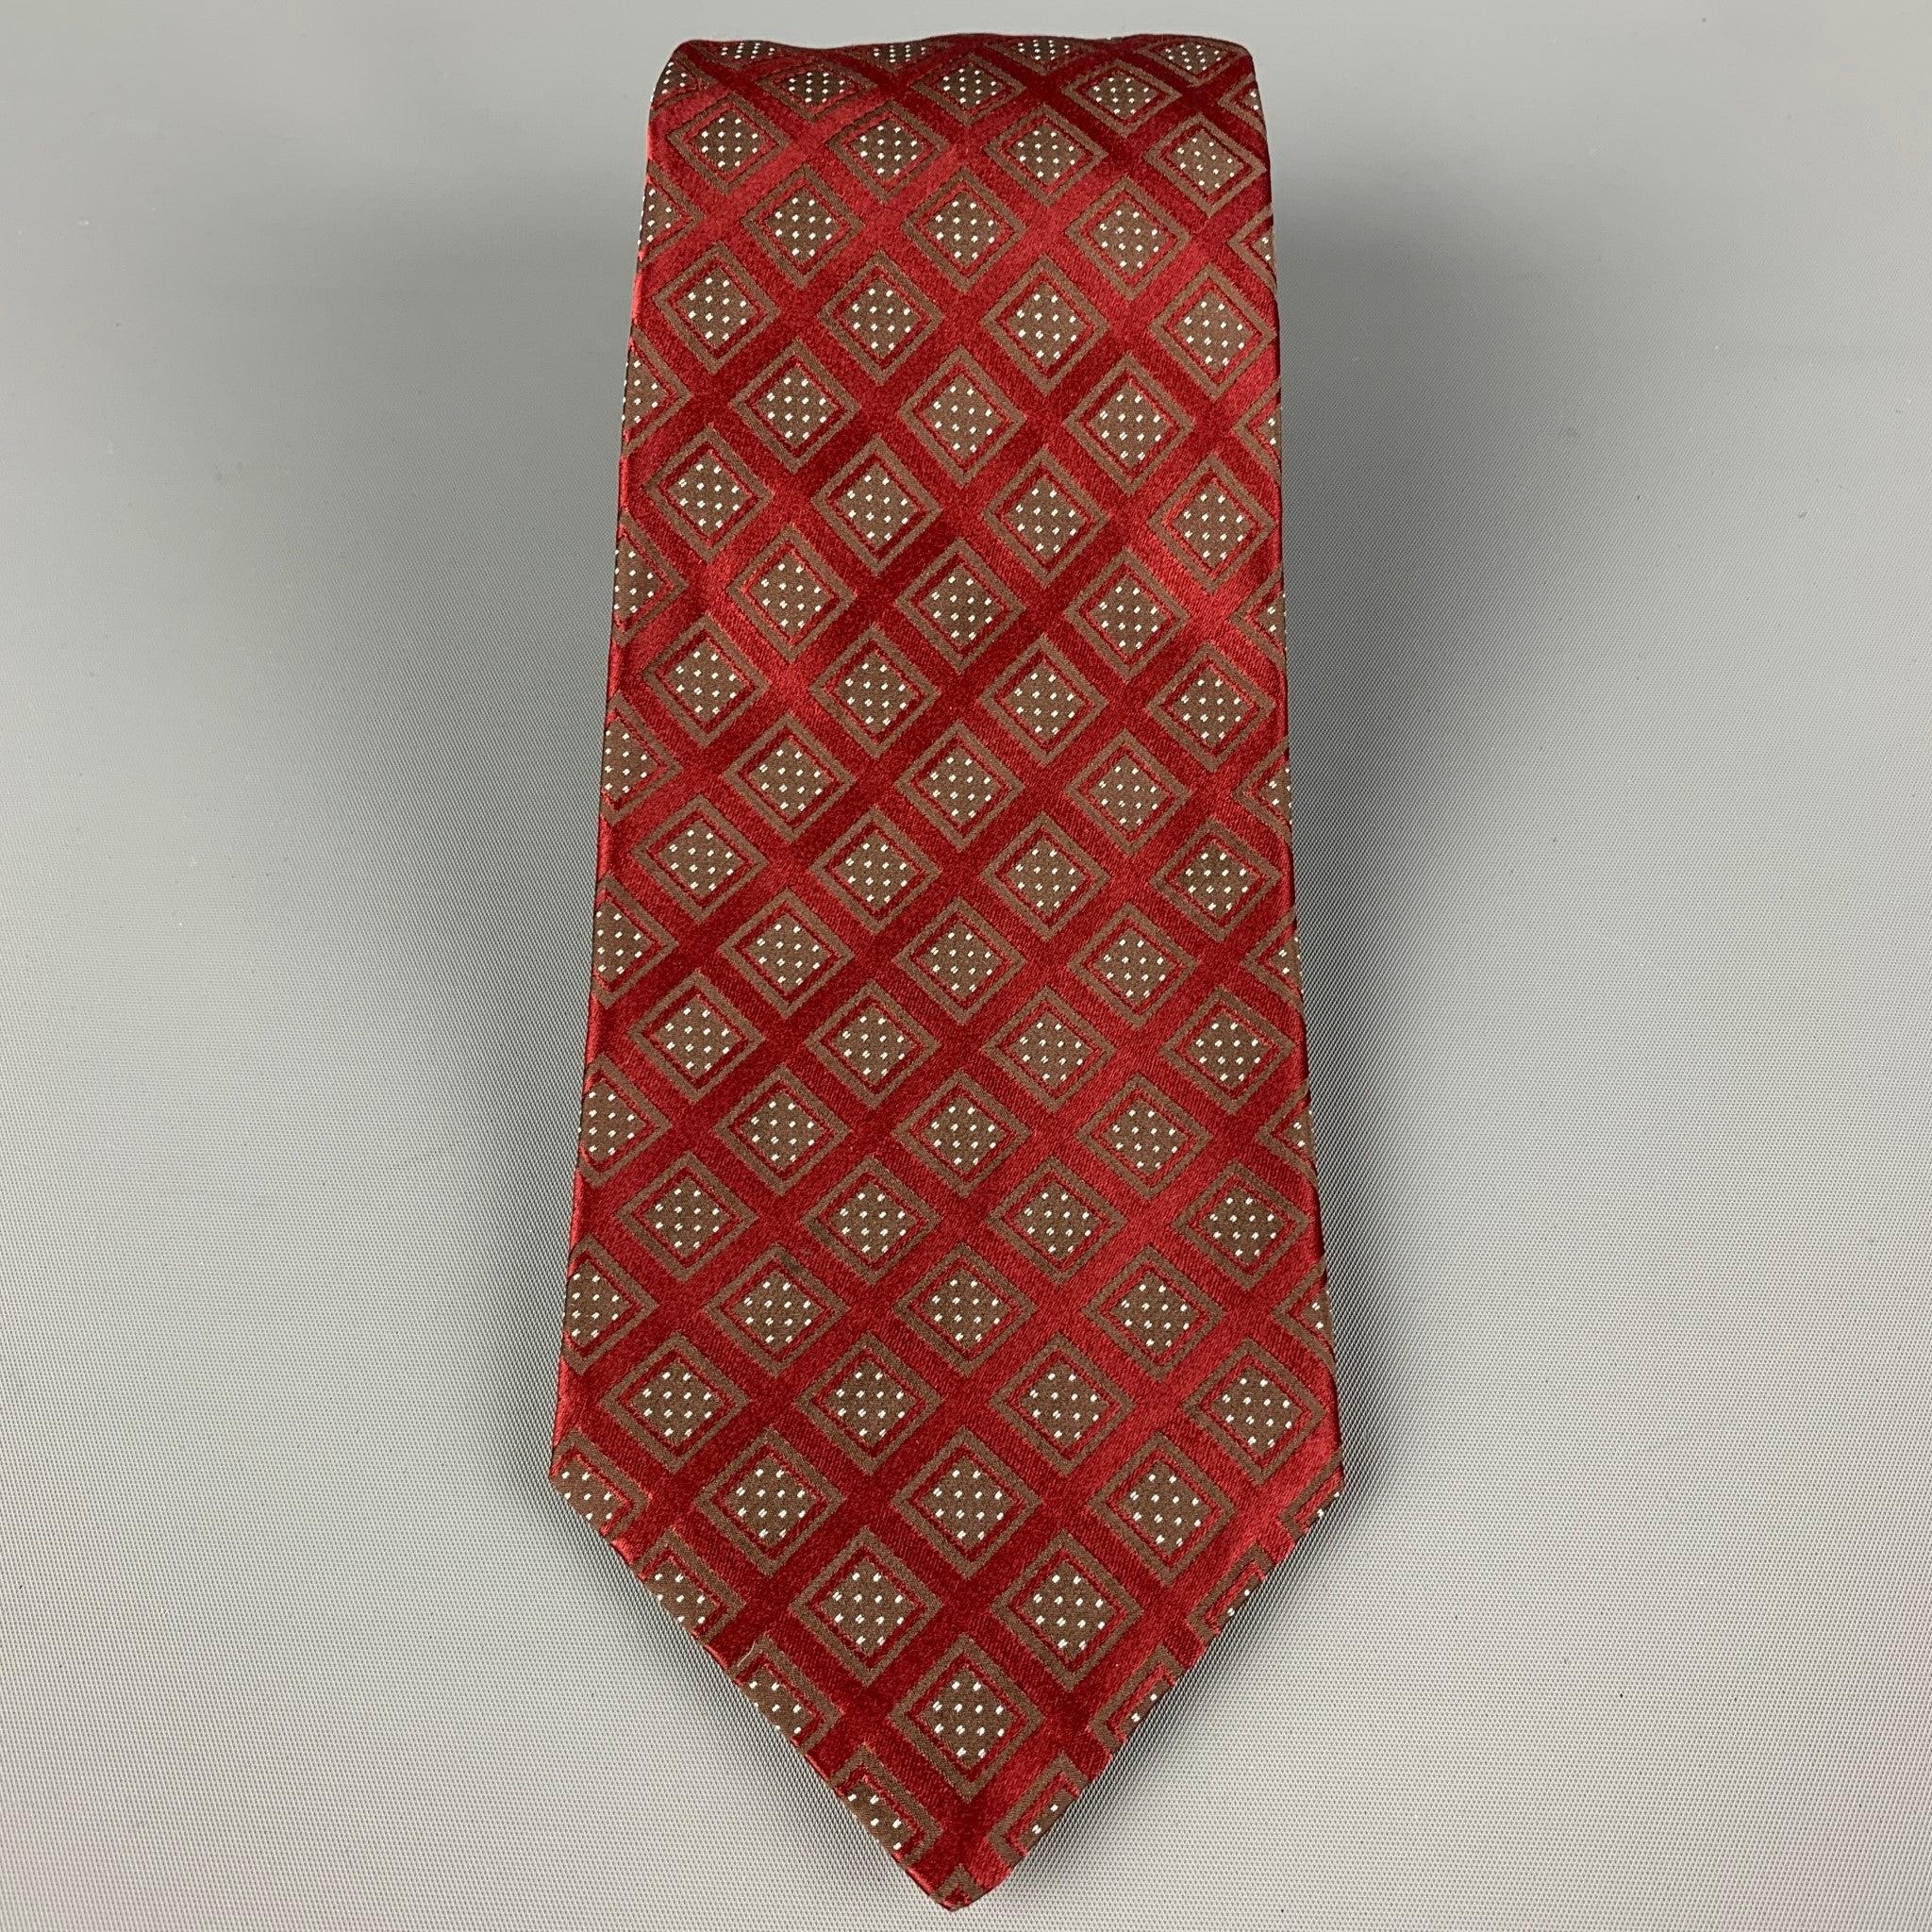 KITON necktie comes in a burgundy & taupe silk with a all over rhombus print. Made in Italy . Very Good Pre-Owned Condition.Width: 3.75 inches  Length: 60 inches 


  
  
 
Reference: 120365
Category: Tie
More Details
    
Brand:  KITON
Gender: 